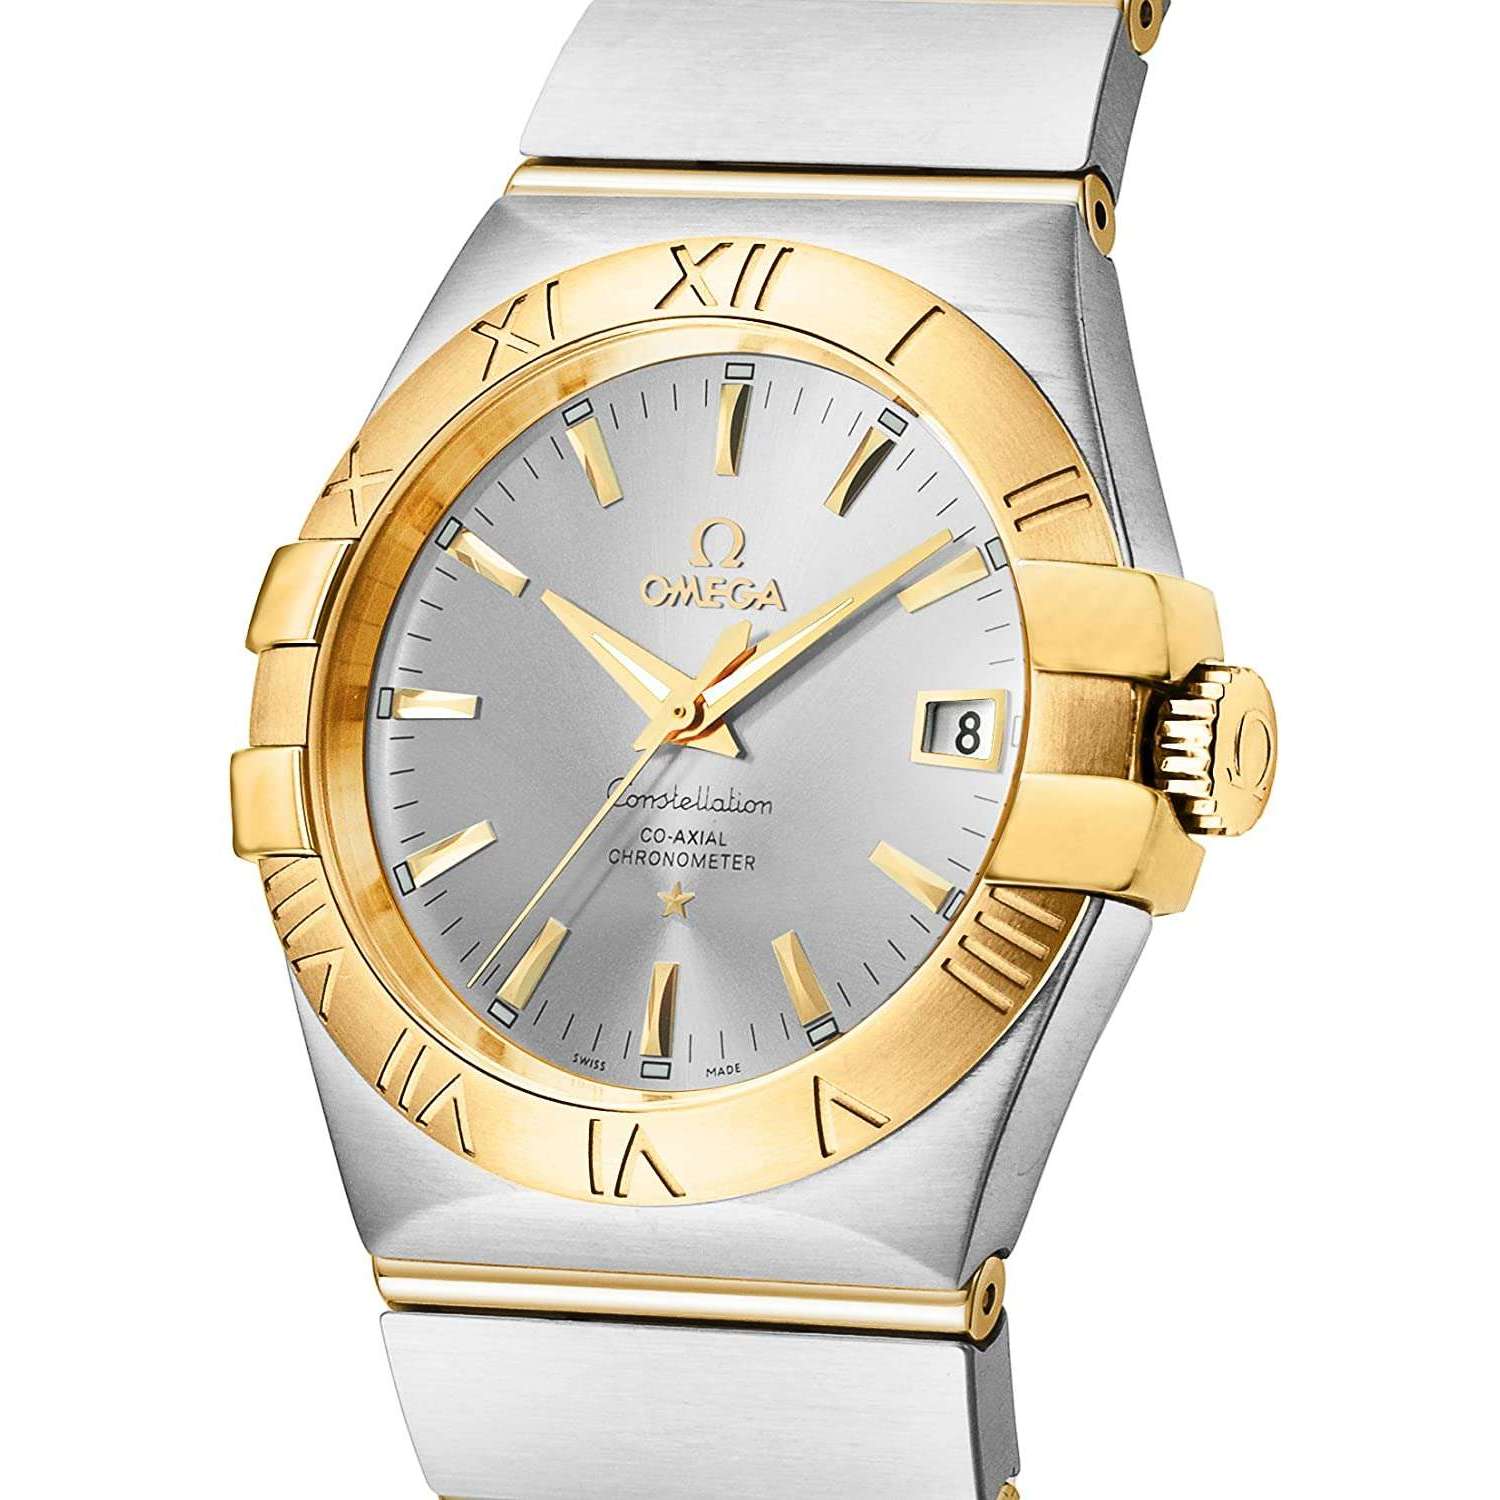 ROOK JAPAN:OMEGA CONSTELLATION CO-AXIAL CHRONOMETER 34.5 MM MEN WATCH 123.20.35.20.02.002,Luxury Watch,Omega